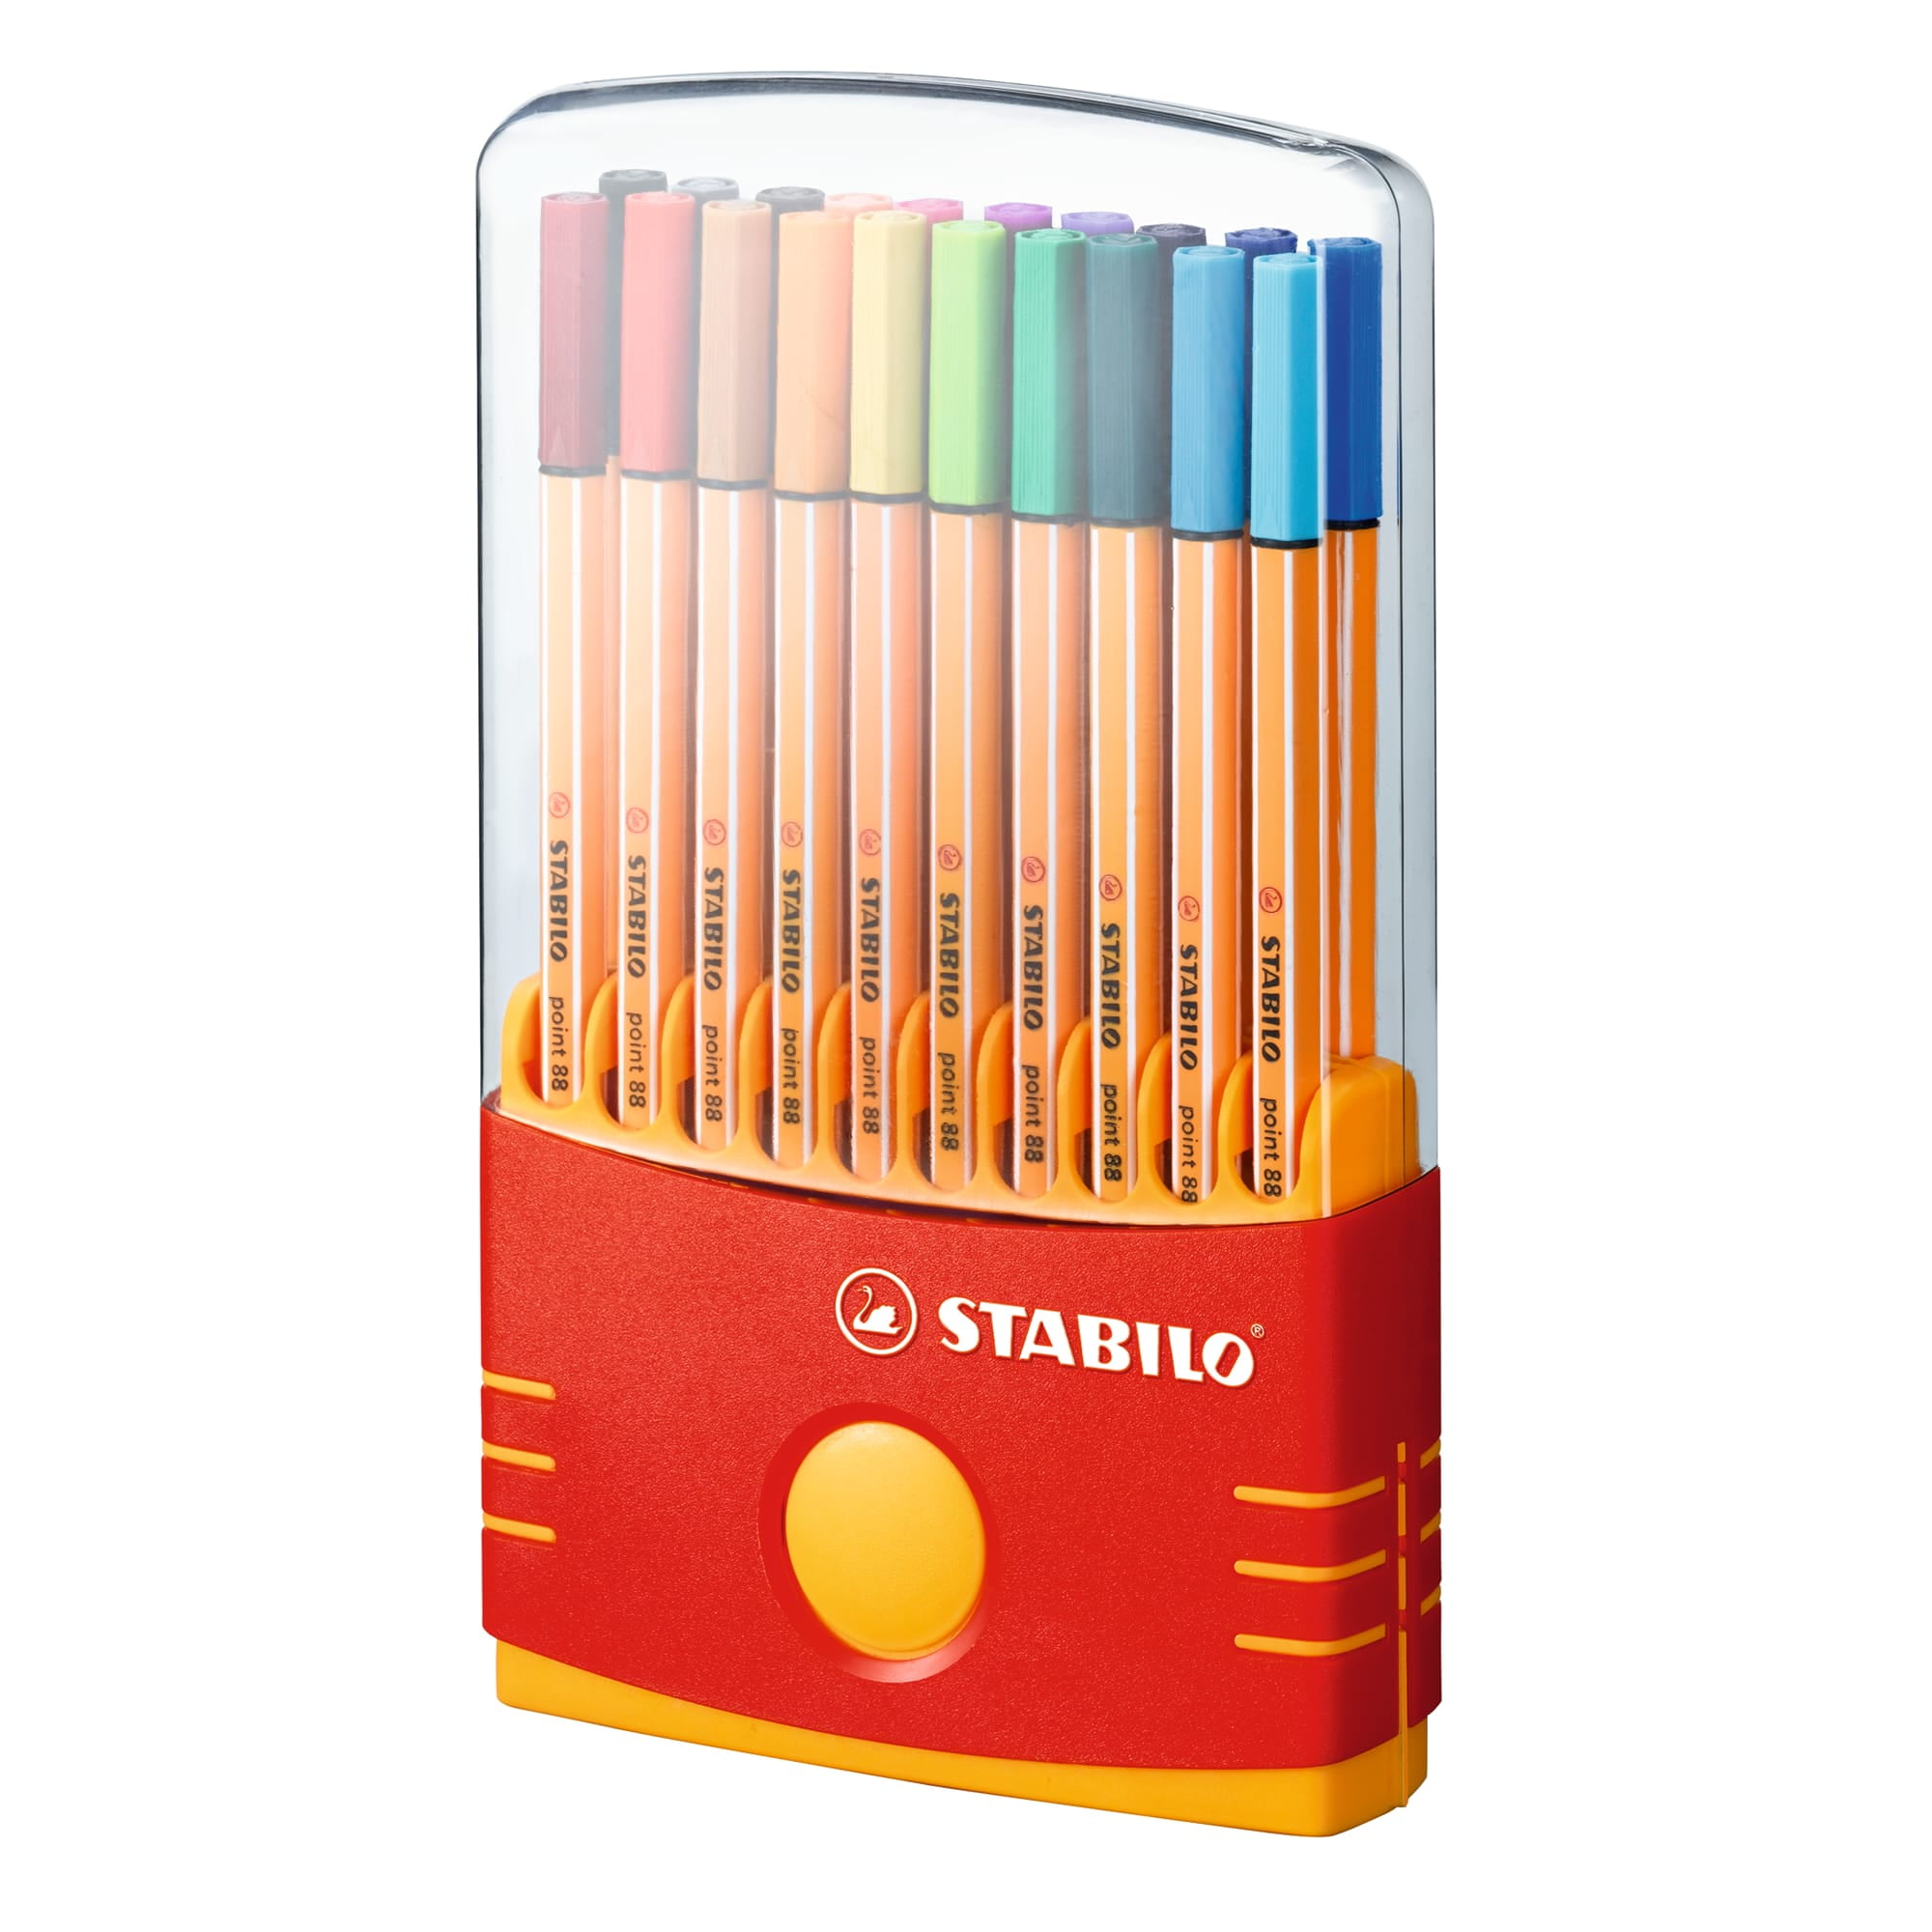 Stabilo Point 88 Fineliners, Muted Colors Set of 8 — ArtSnacks